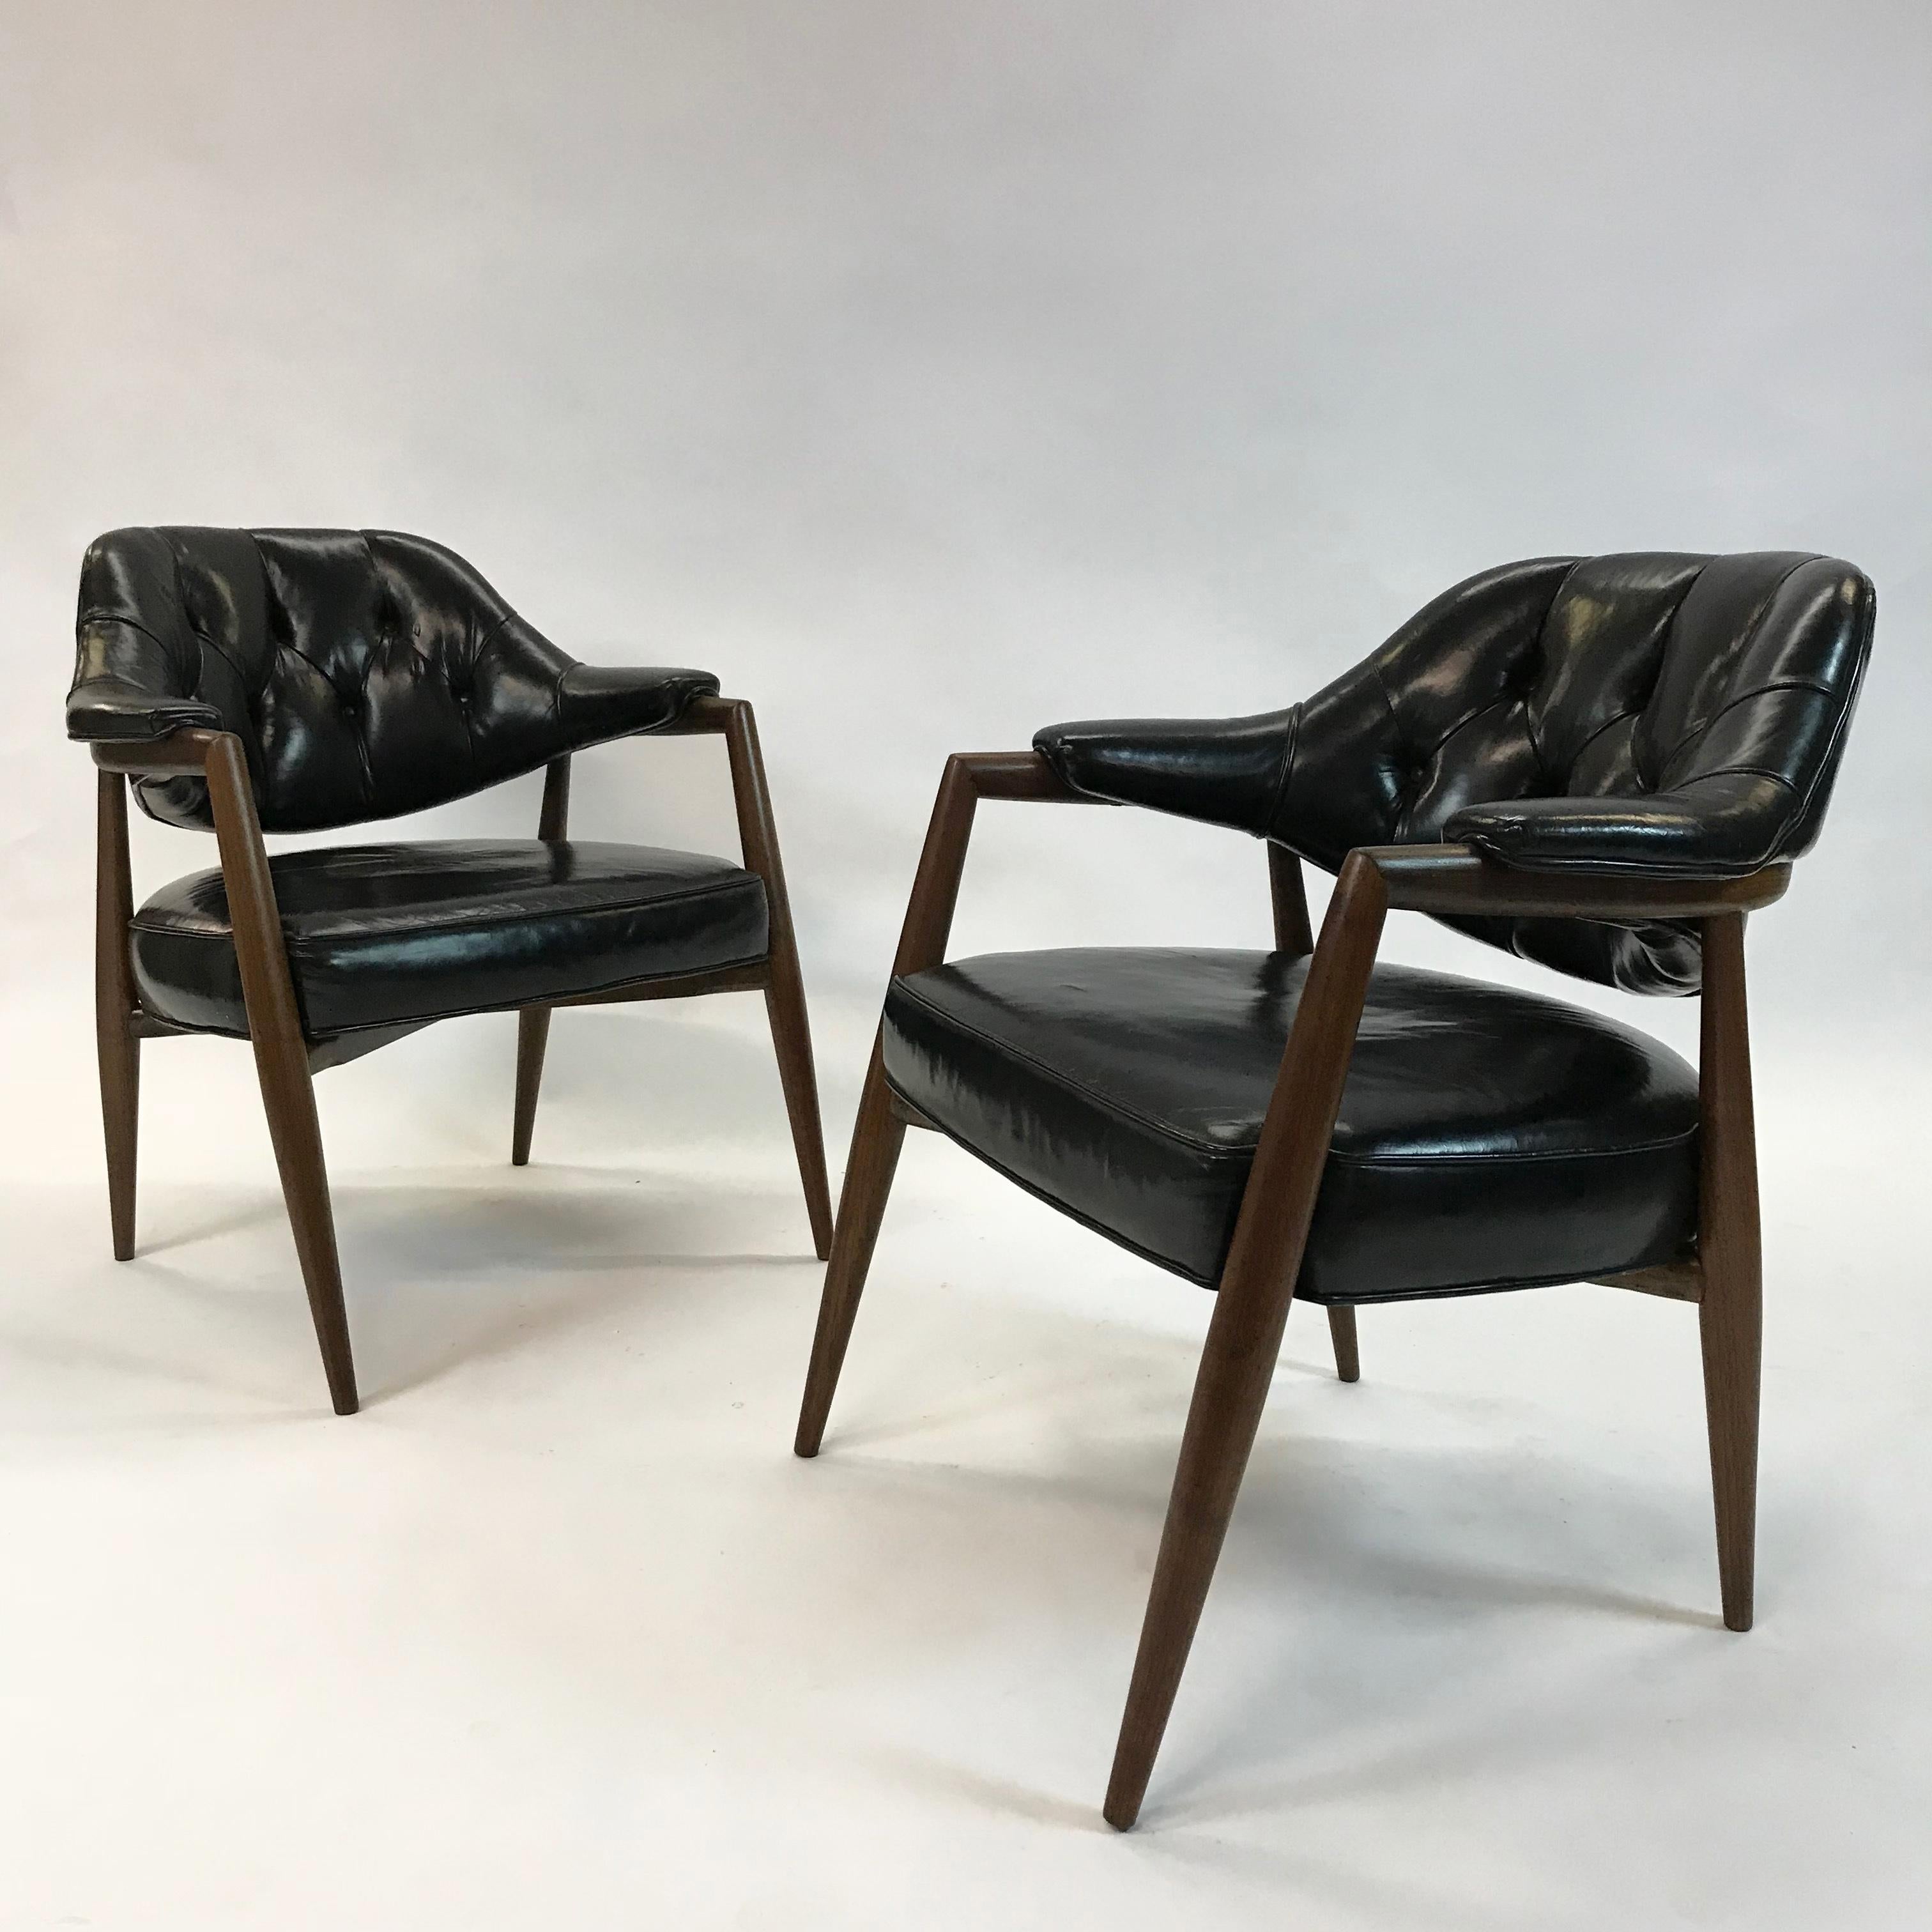 Pair of walnut armchairs by Maurice Bailey for Monteverdi-Young feature tufted backs in their original black leather upholstery.